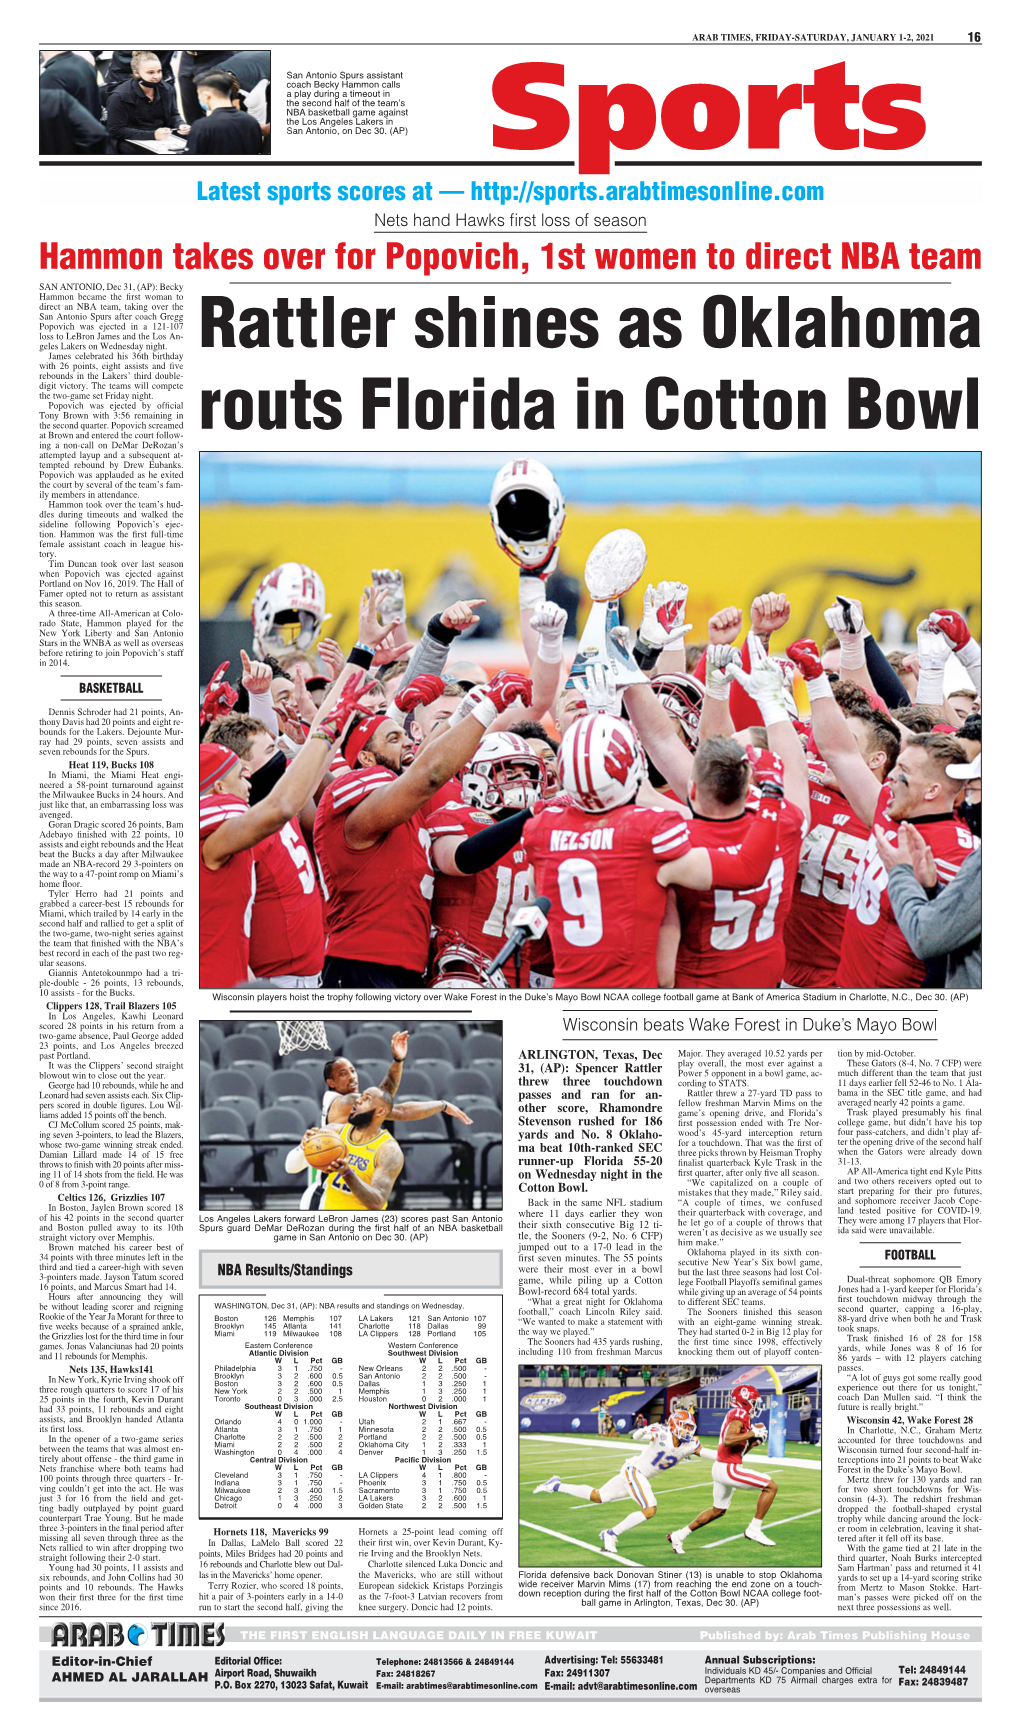 Rattler Shines As Oklahoma Routs Florida in Cotton Bowl